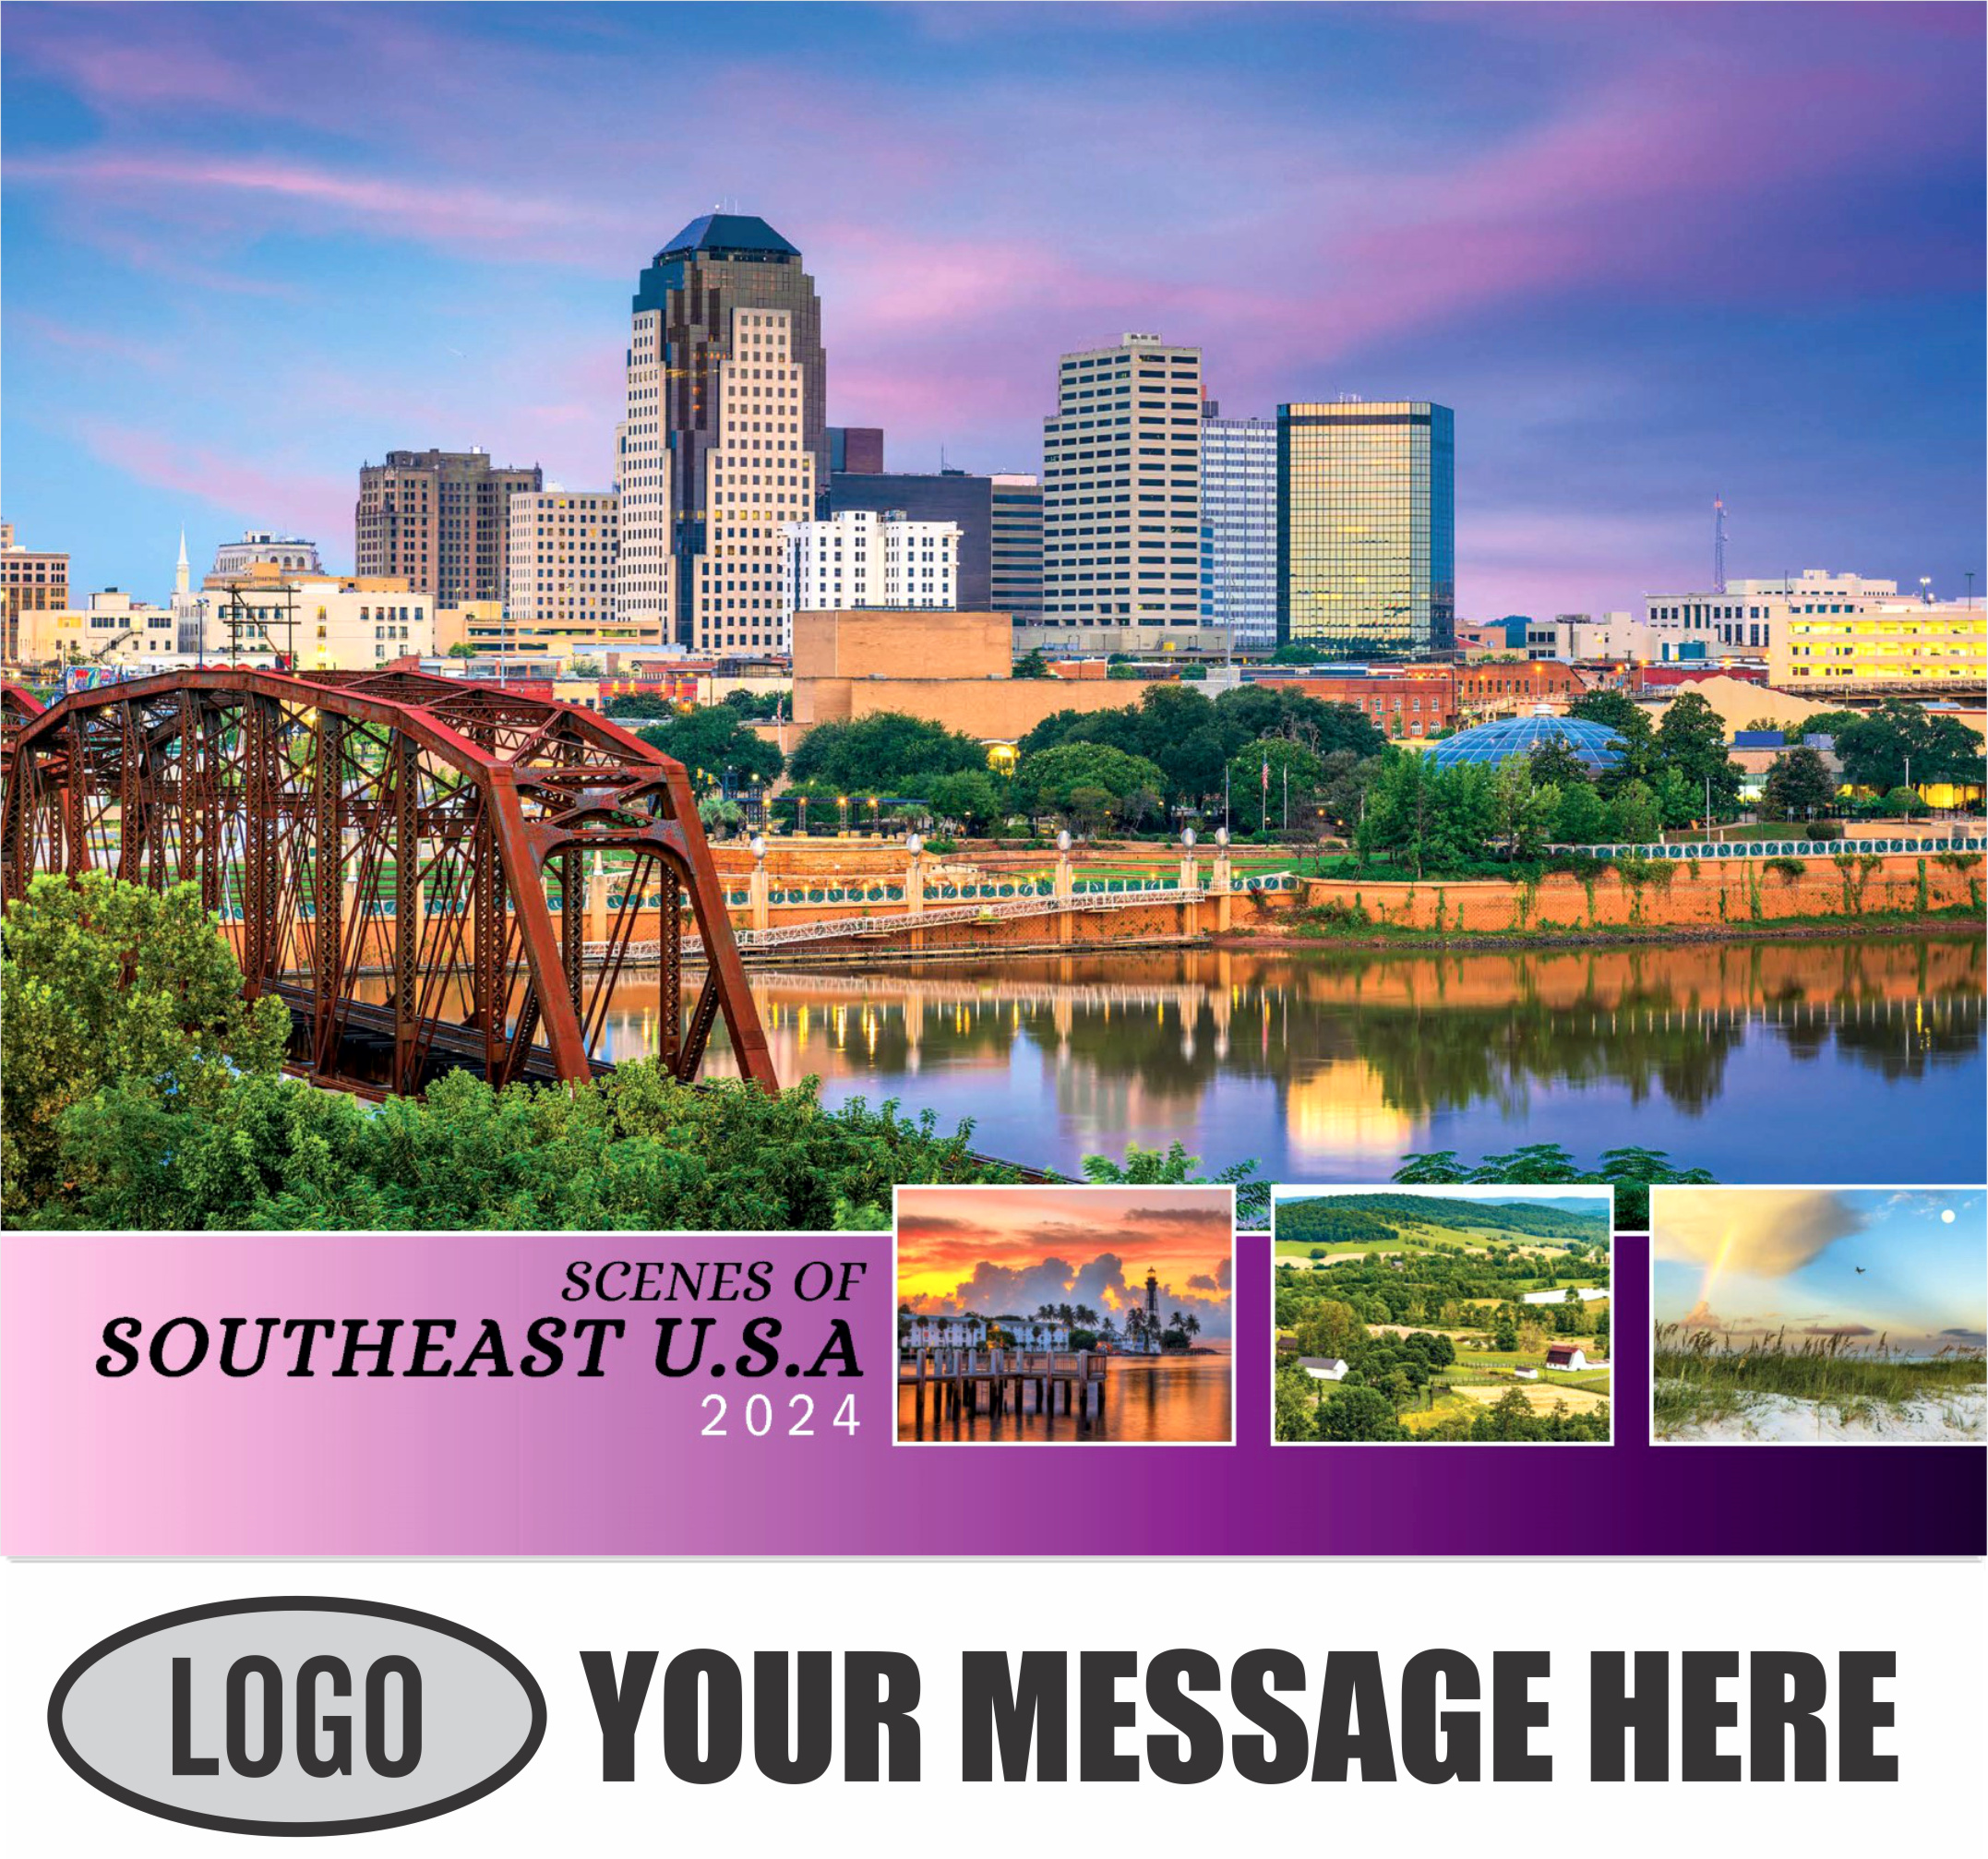 Scenes of Southeast USA 2024 Business Promo Wall Calendar - cover